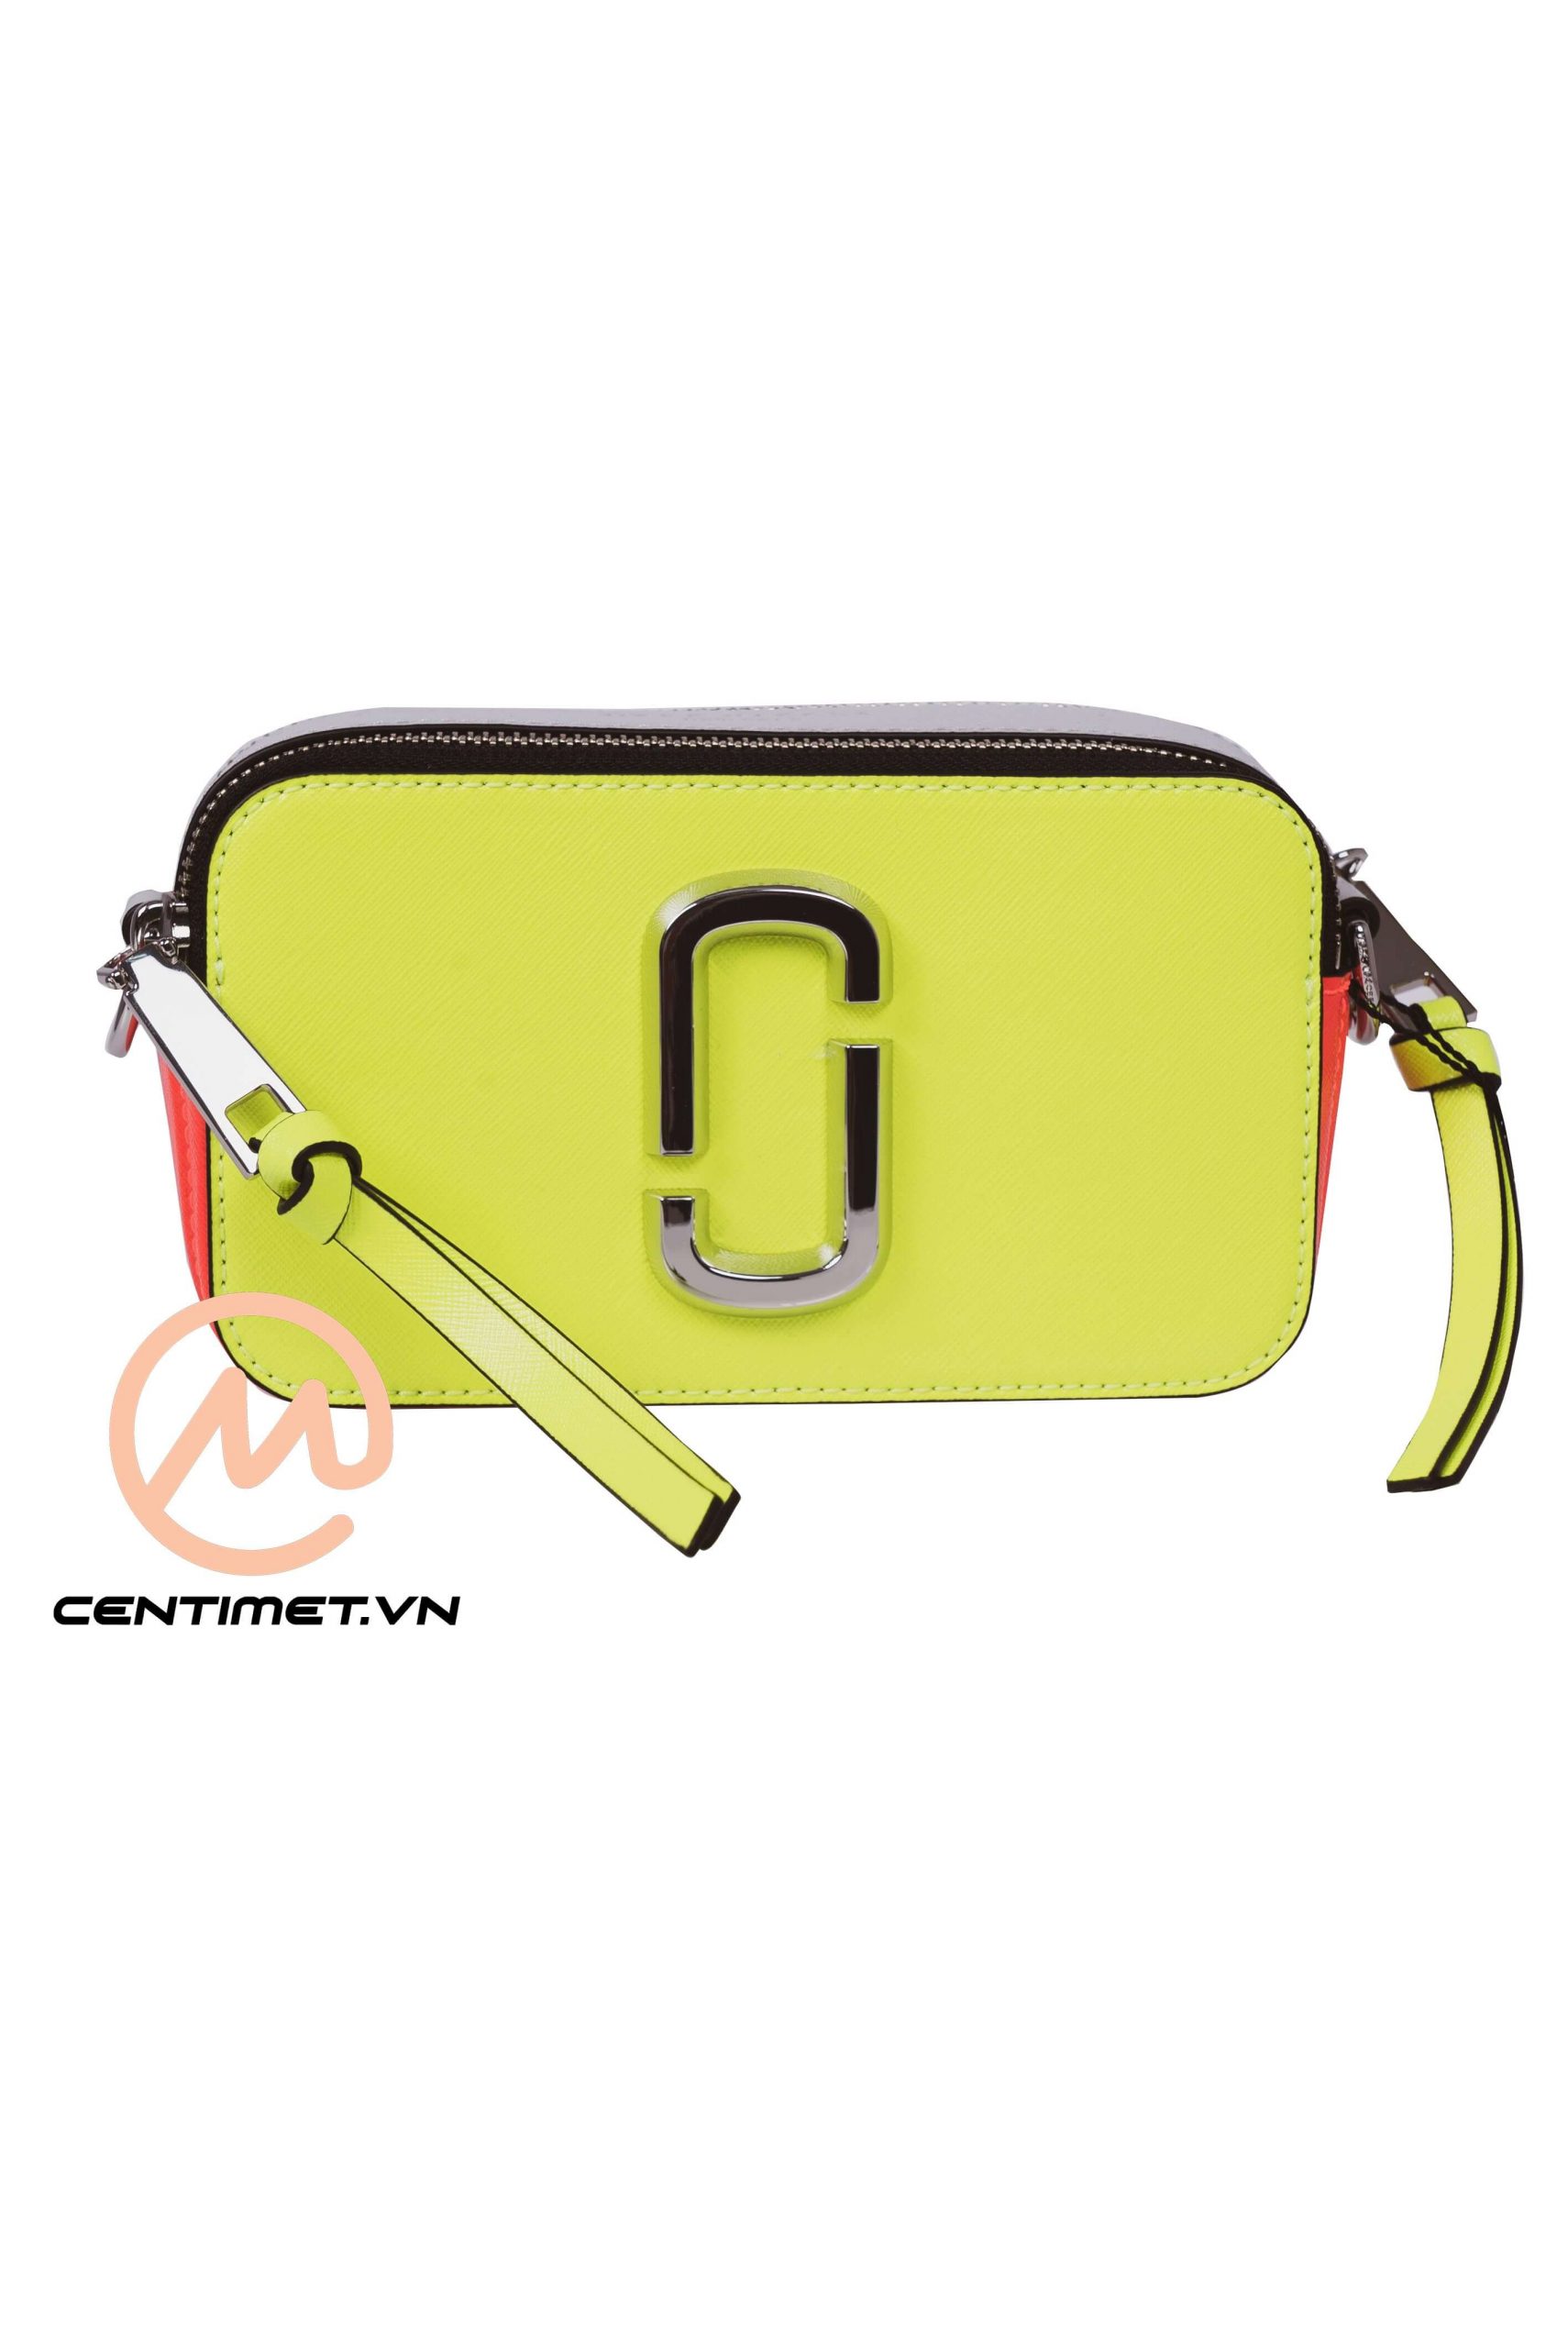 Tui Marc Jacobs Snapshot Small Camera Bag in Lime-DSC09949-Edit